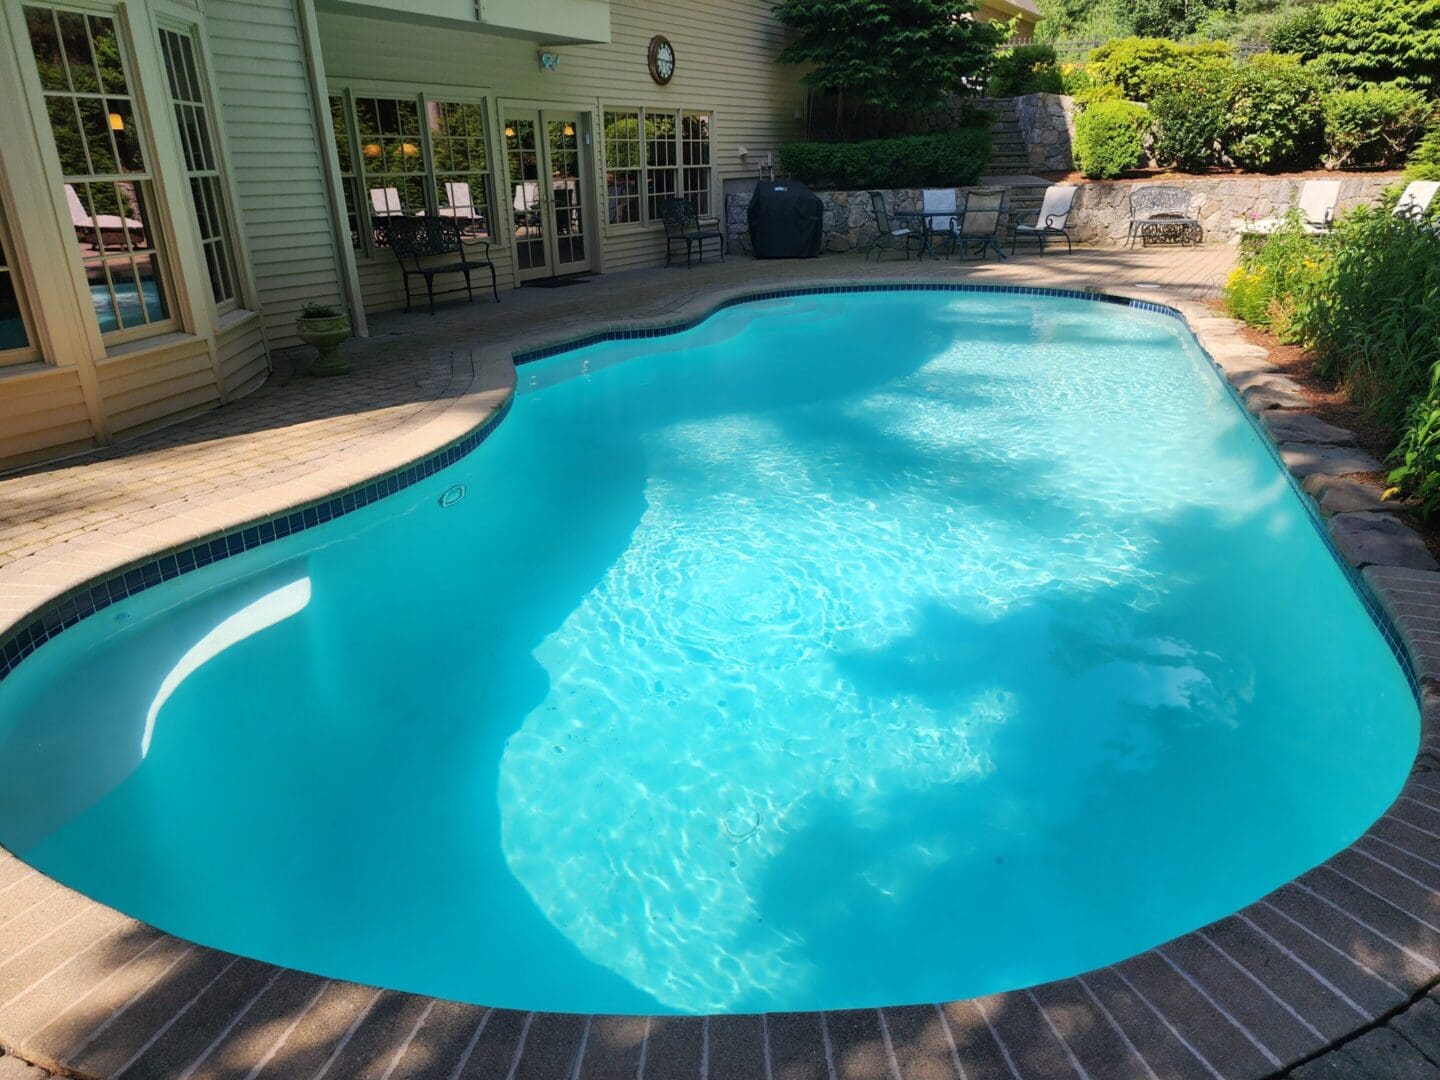 A pool with a brick deck and tile floor.